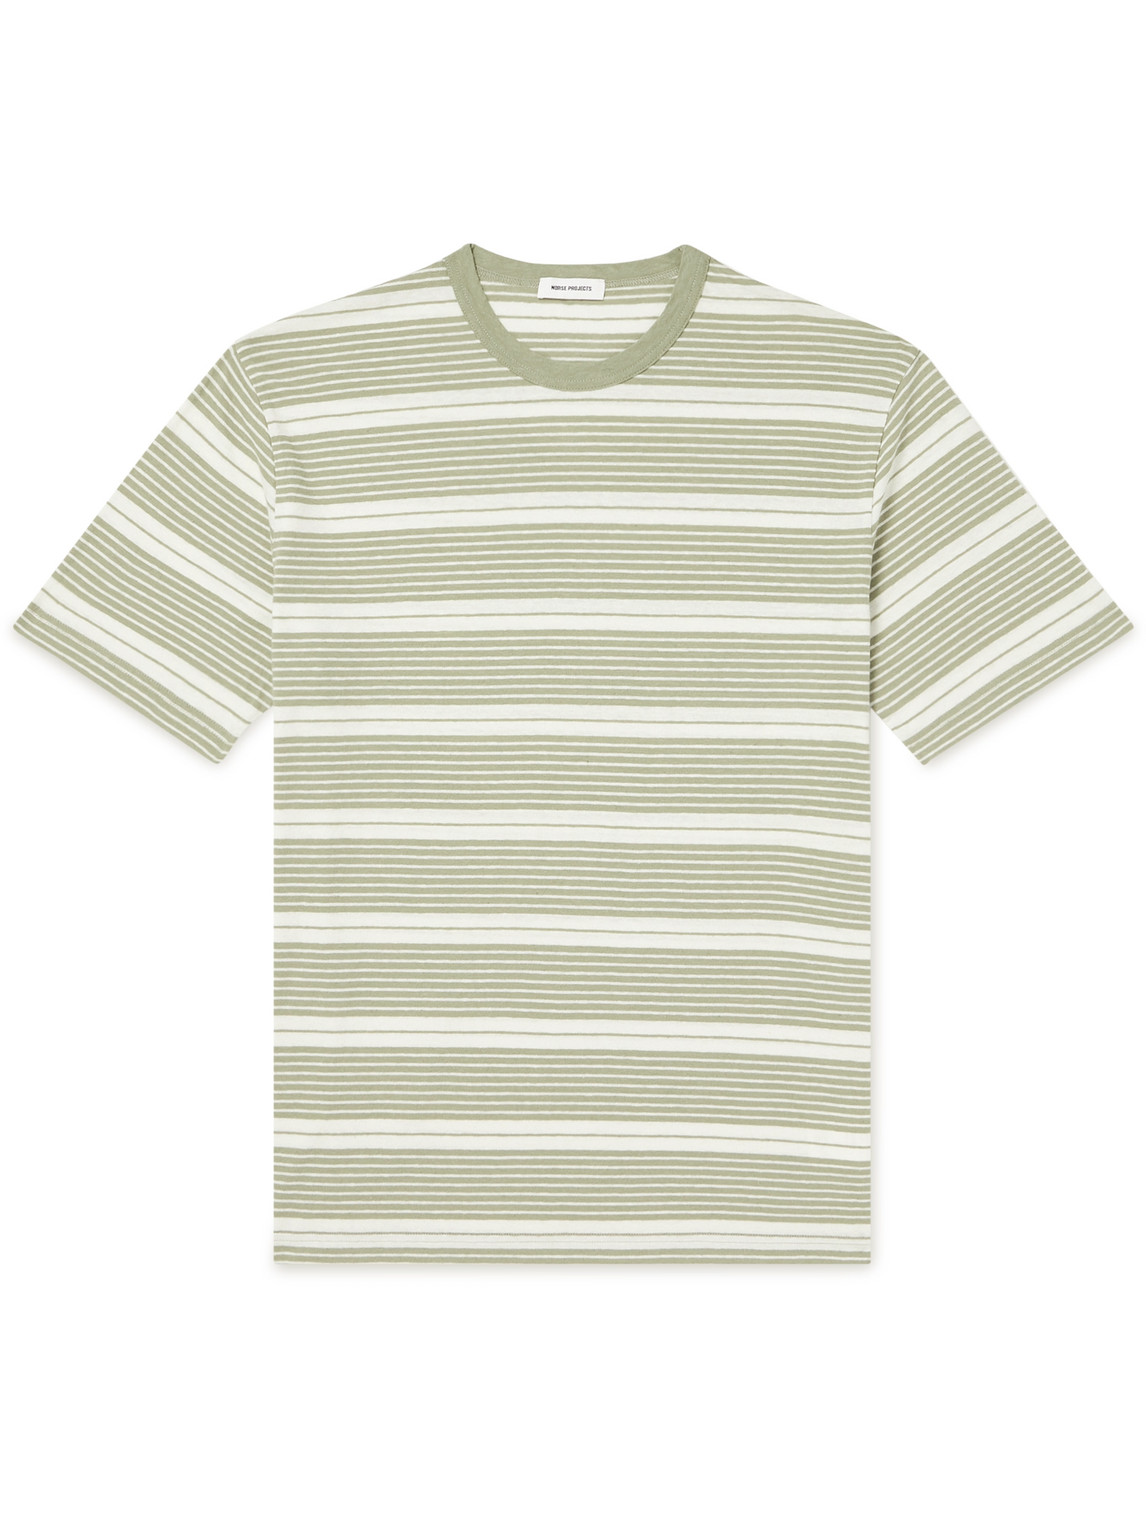 NORSE PROJECTS JOHANNES STRIPED COTTON-BLEND JERSEY T-SHIRT